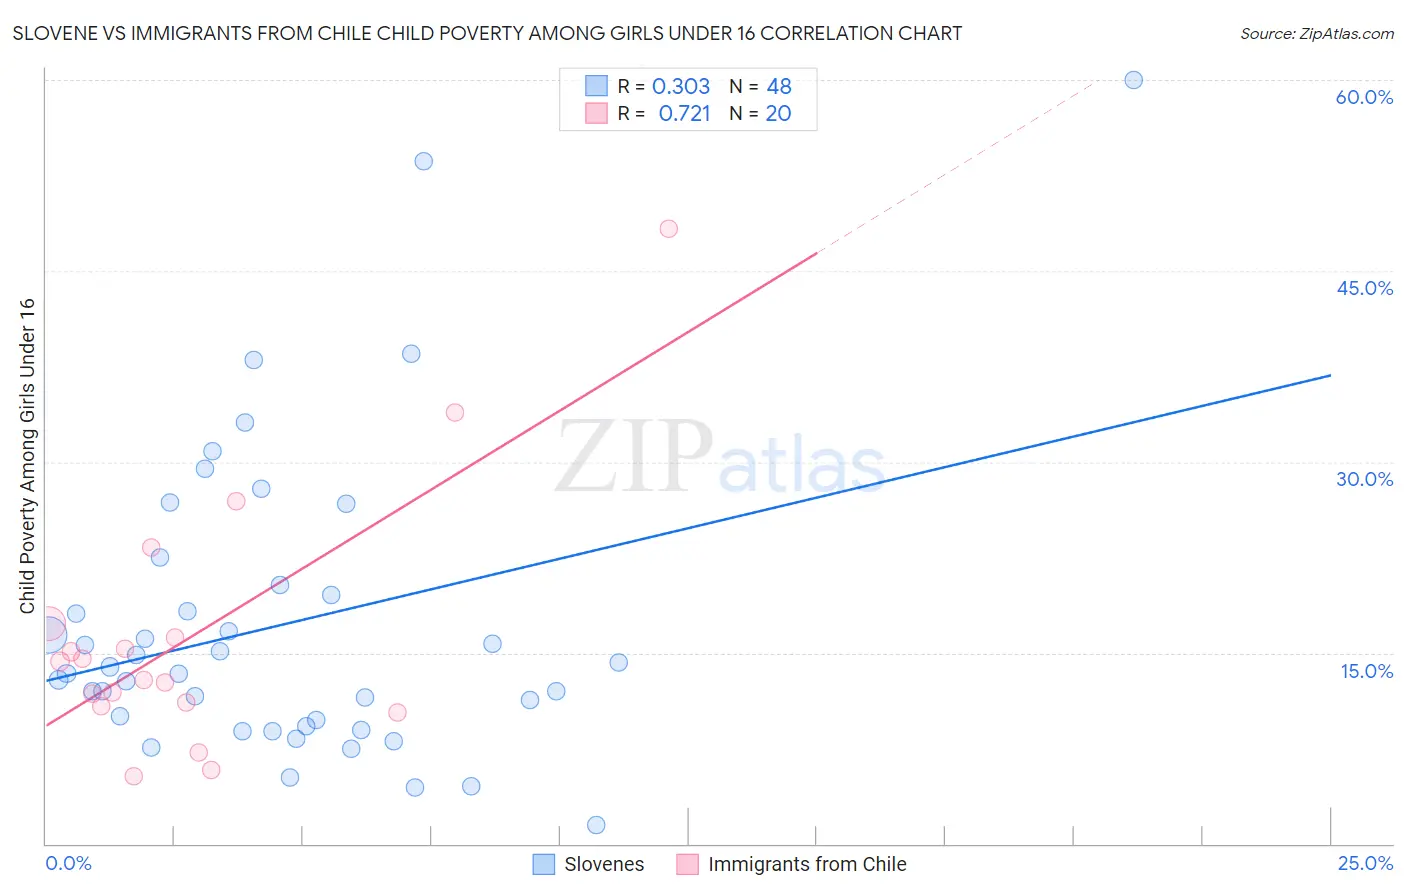 Slovene vs Immigrants from Chile Child Poverty Among Girls Under 16